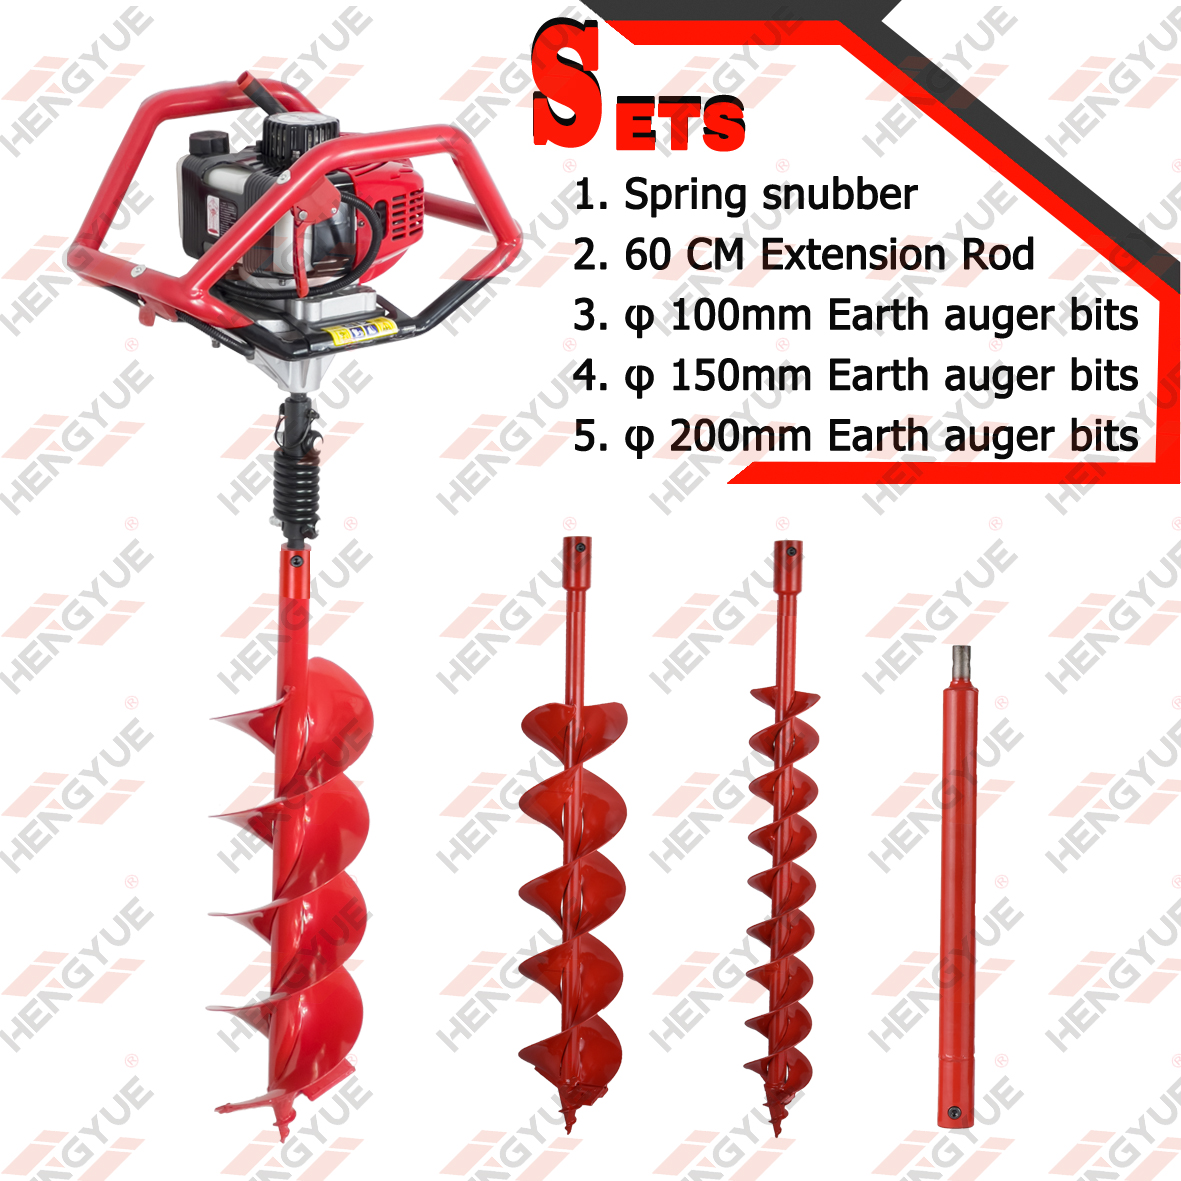 52cc 1 or 2 man operate new desing earth auger 